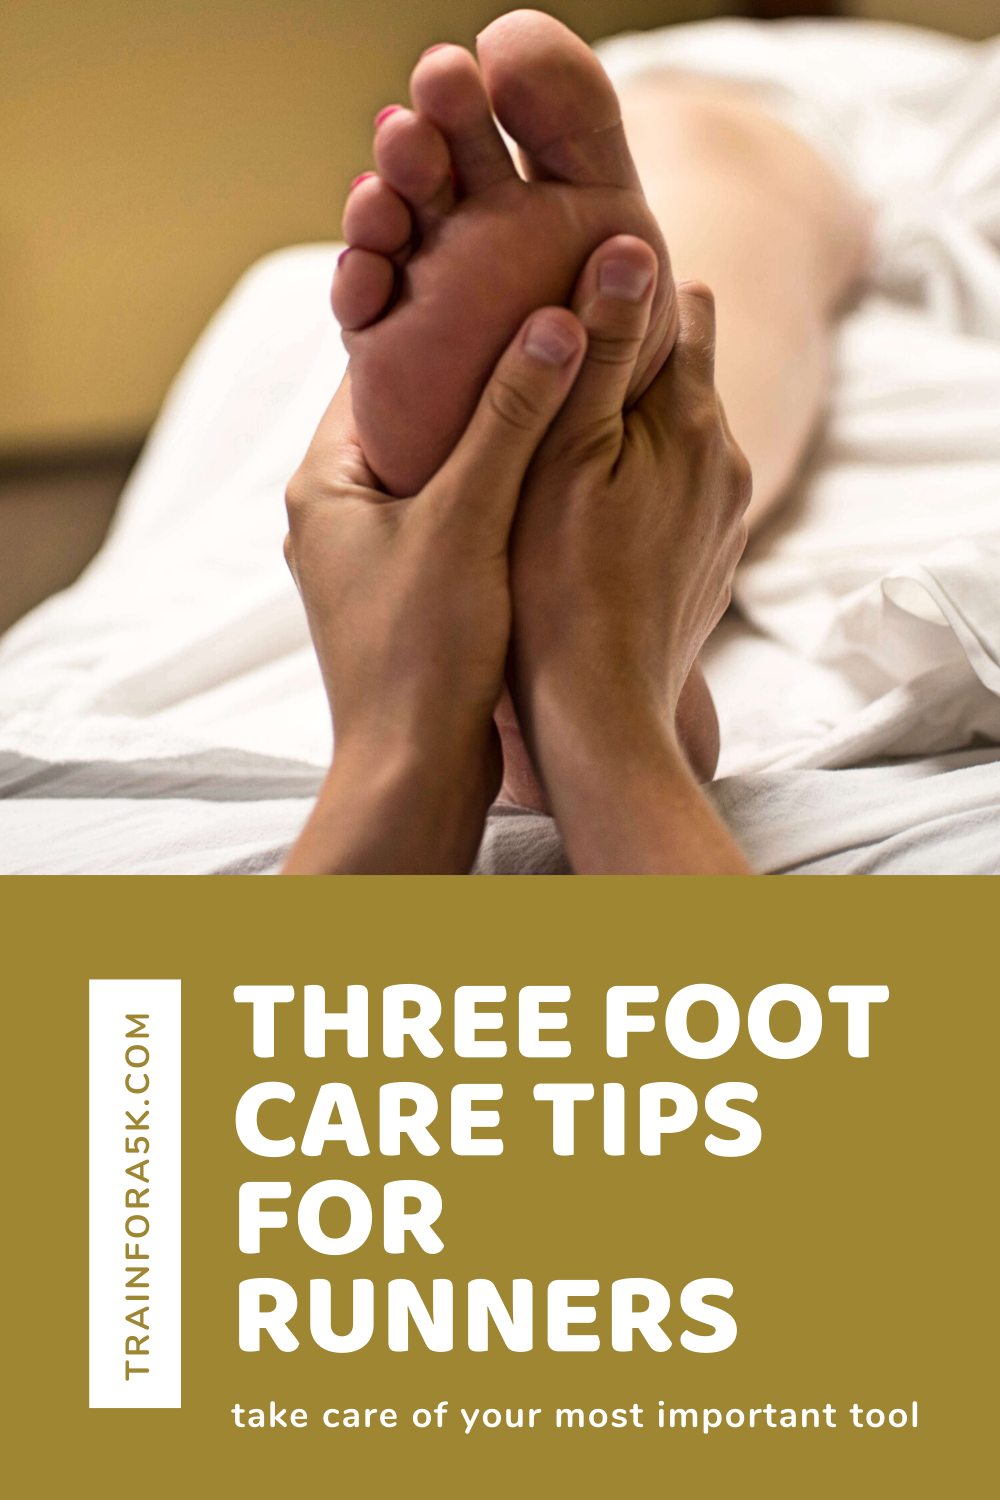 3 Important Foot Care Tips For Runners In 2020 Feet Care Runner Problems Jogging For Beginners